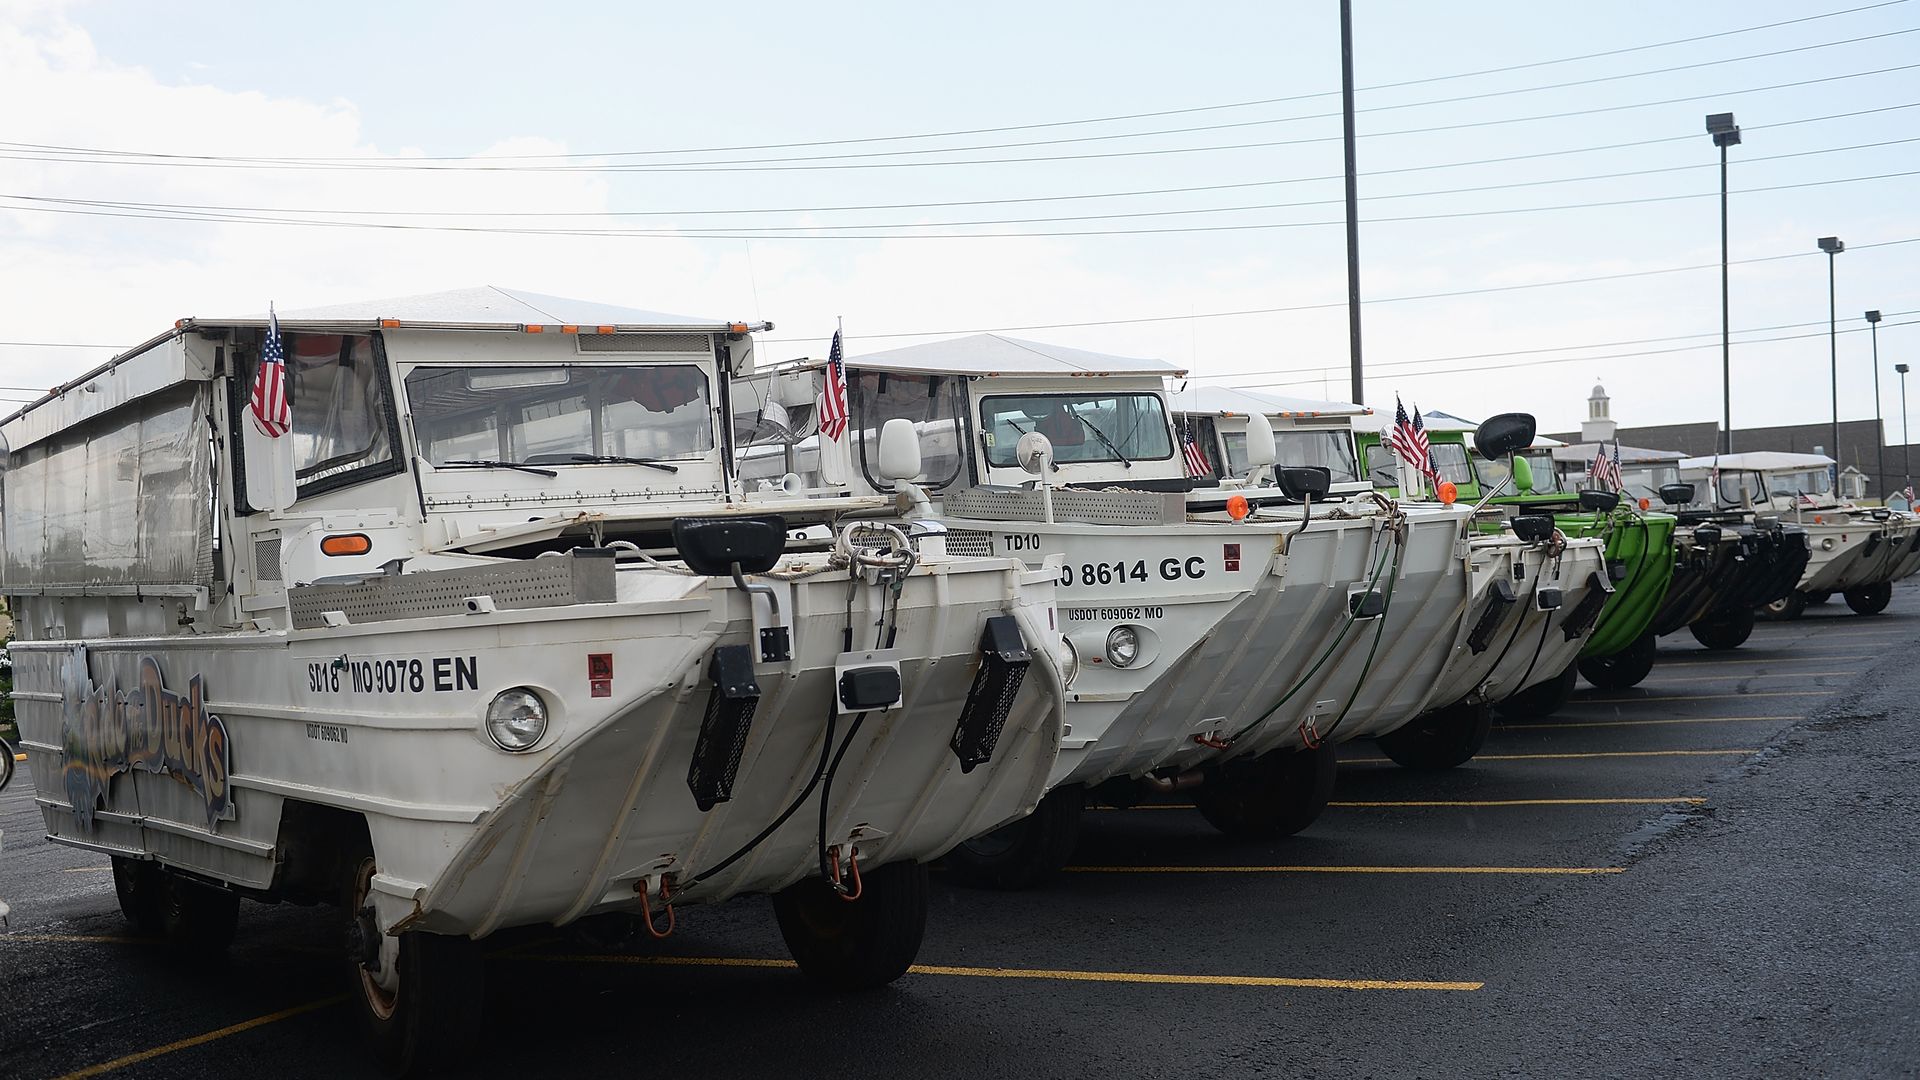 The fleet of the World War II DUKW boats are seen at Ride the Ducks on July 20. Hundreds of mourners stopped by to pay their respects to the victims after a duck boat capsized.